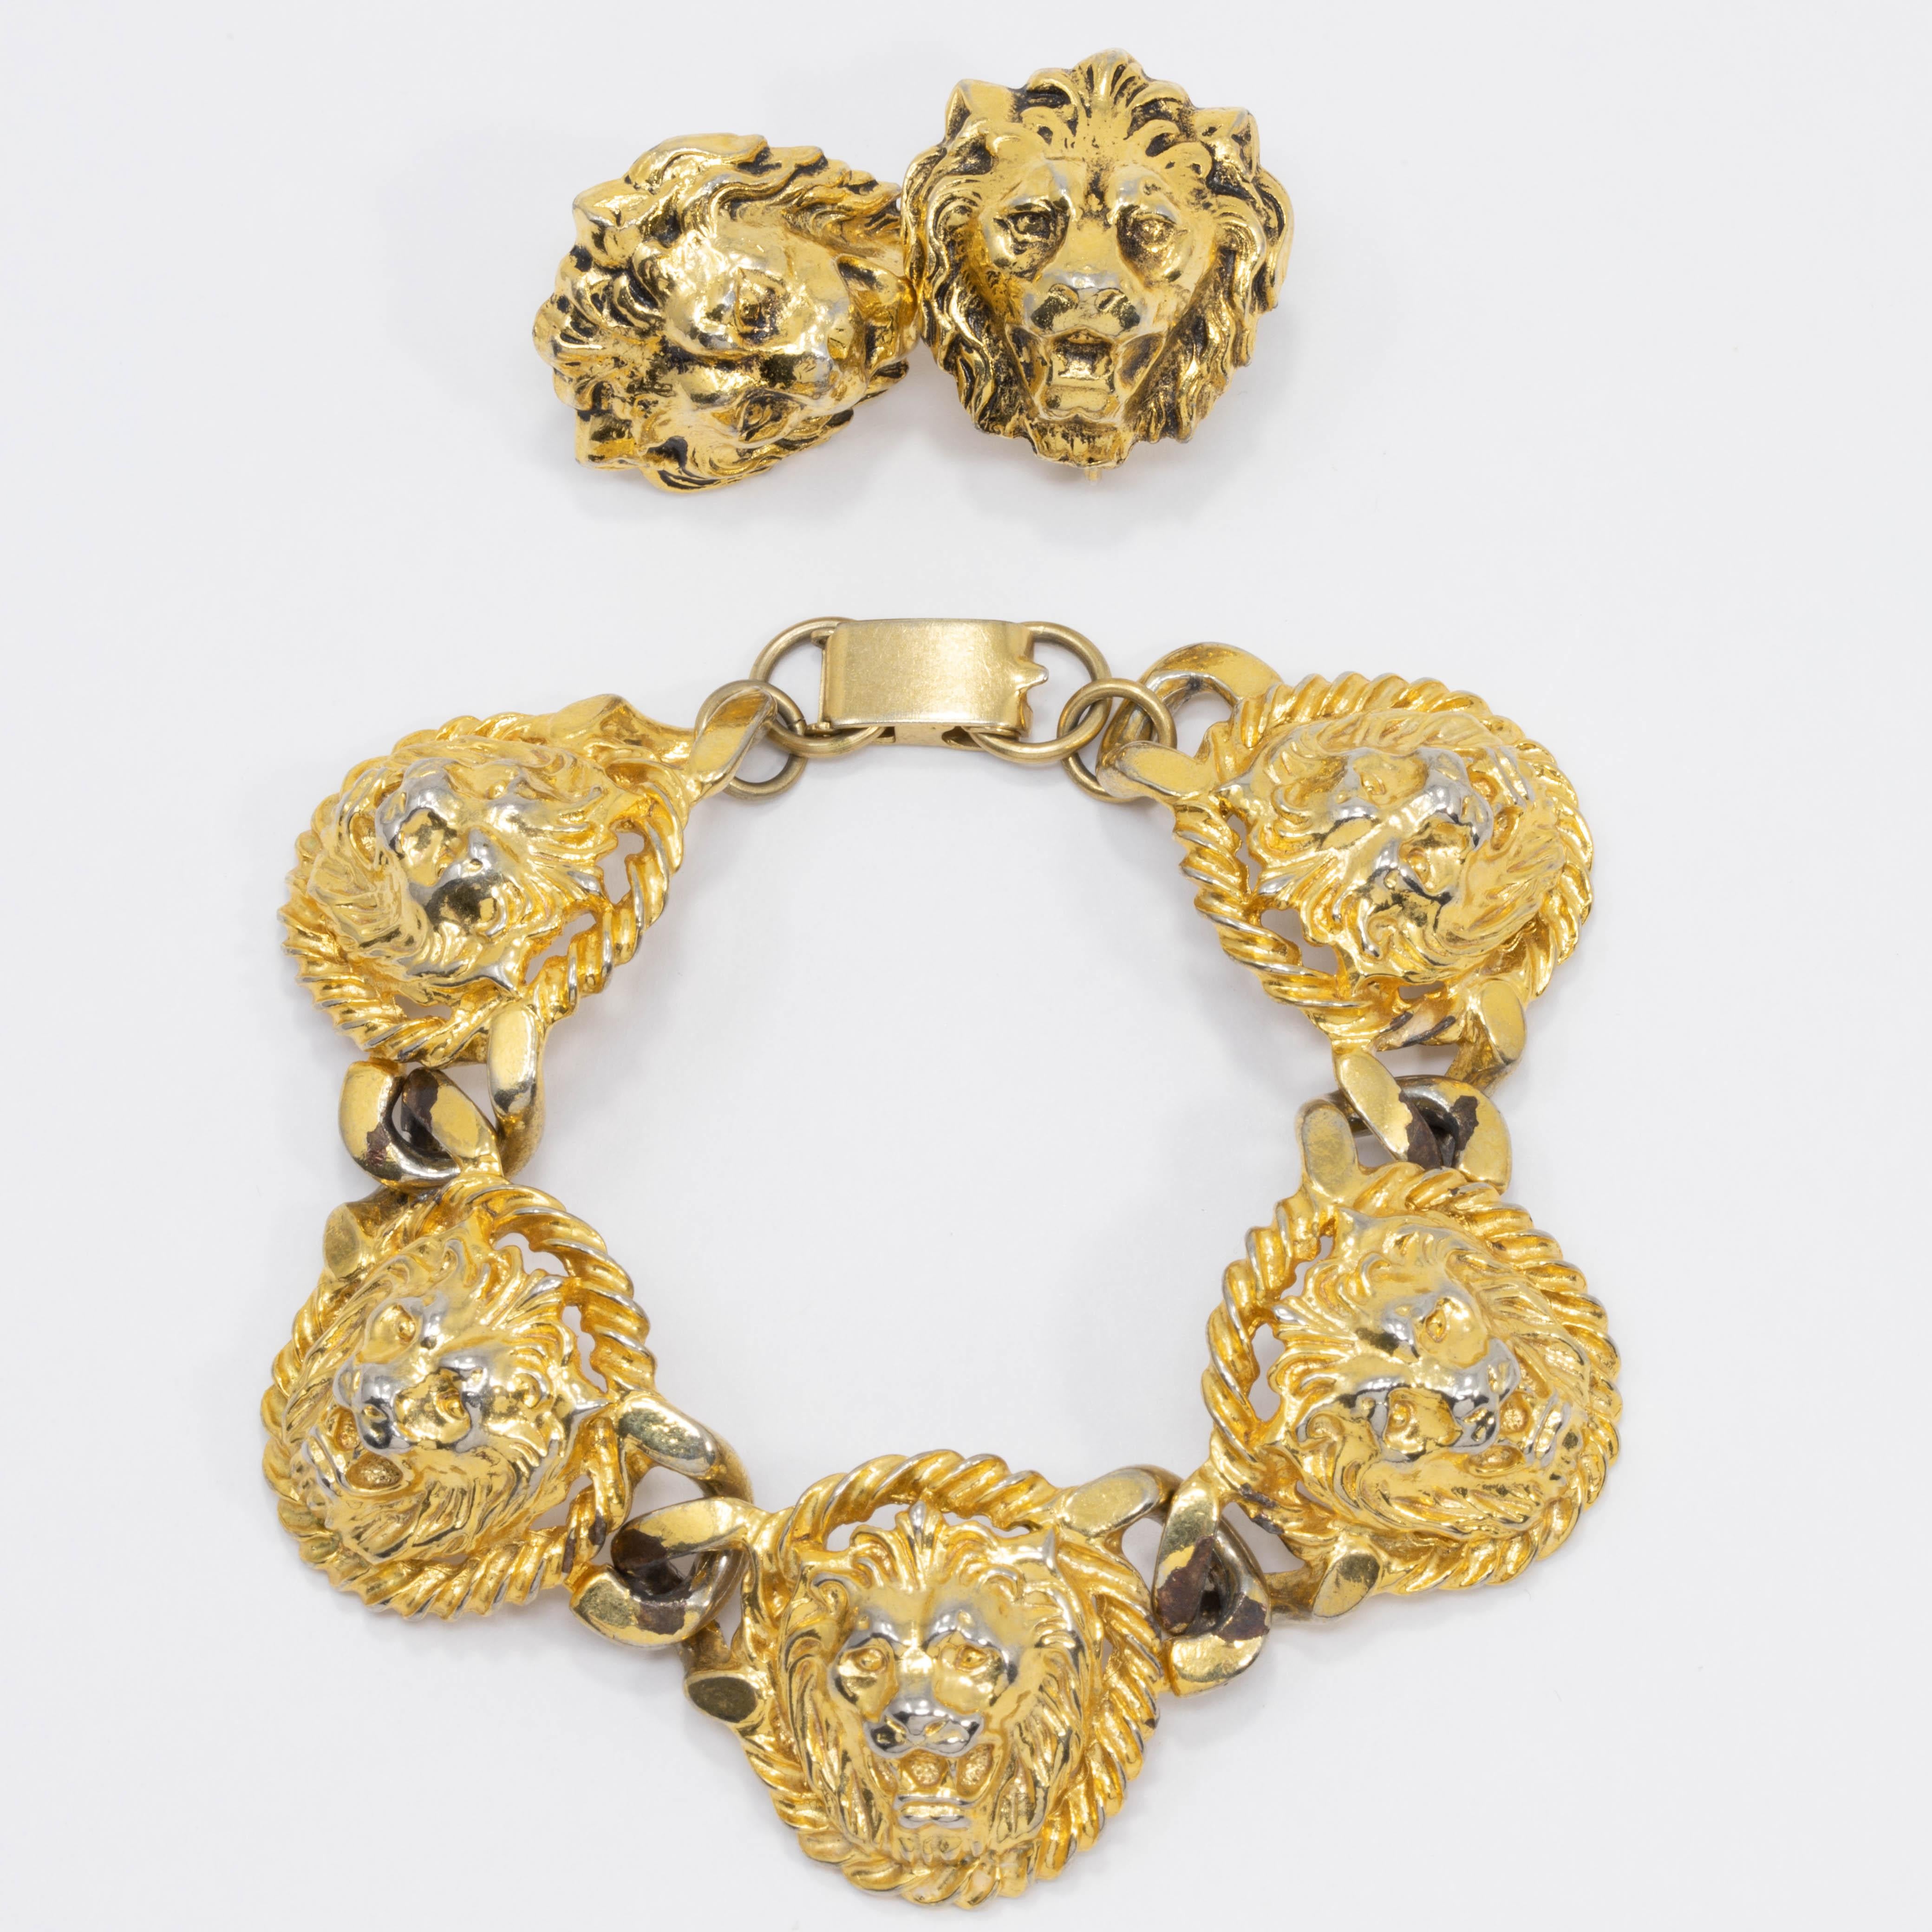 Make a statement with this majestic bracelet and earring set! Goldtone lion heads make up each link of the bracelet, as well as each clip on earring. 

Estimated production - mid 1900s.

Some wear of gold plating due to age.

Bracelet 18 cm / 7.25